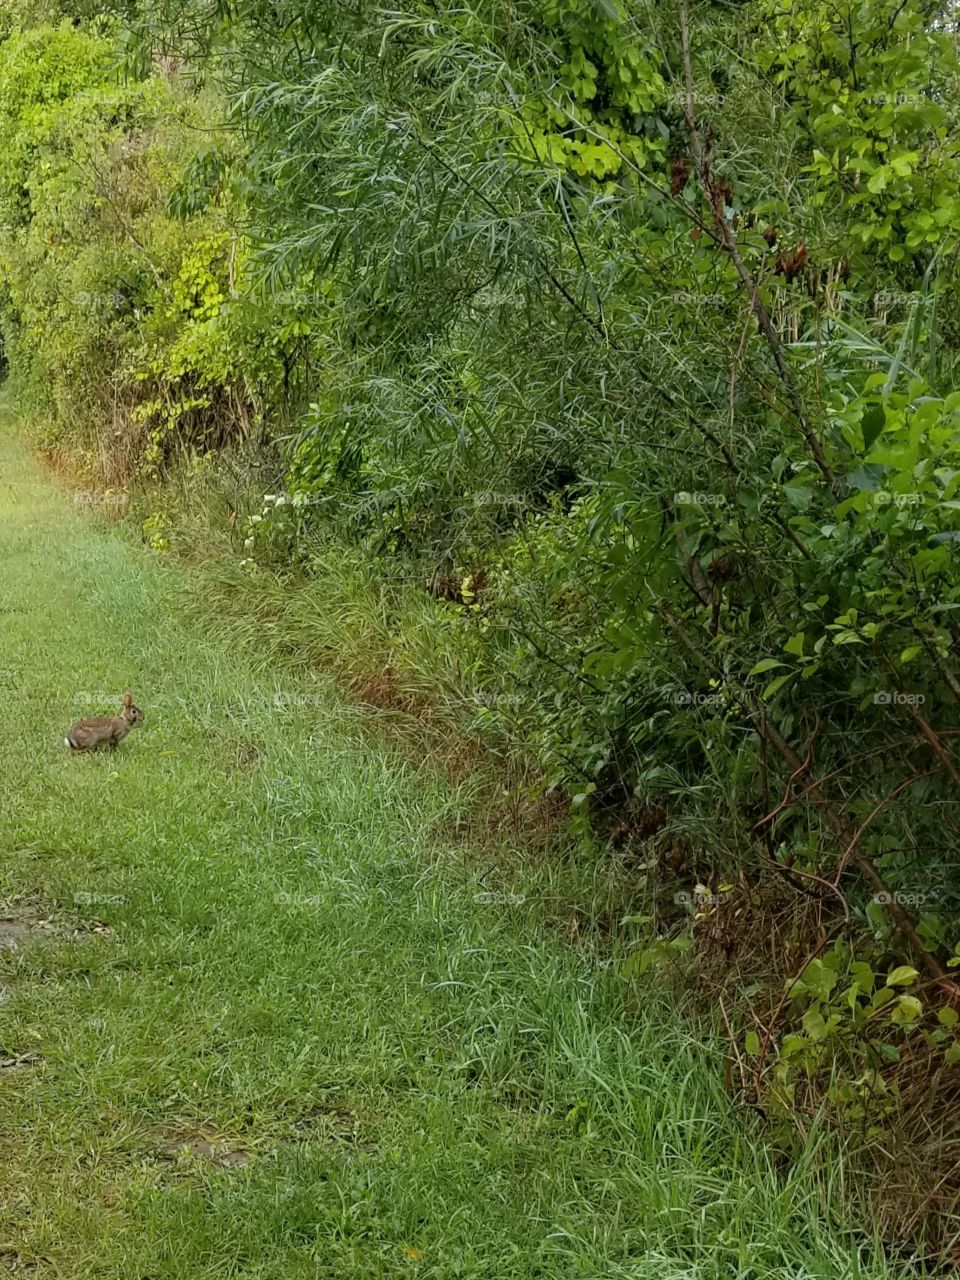 Another pic of one of our rabbit friends today. They were not too afraid of us, made for a fun walk.